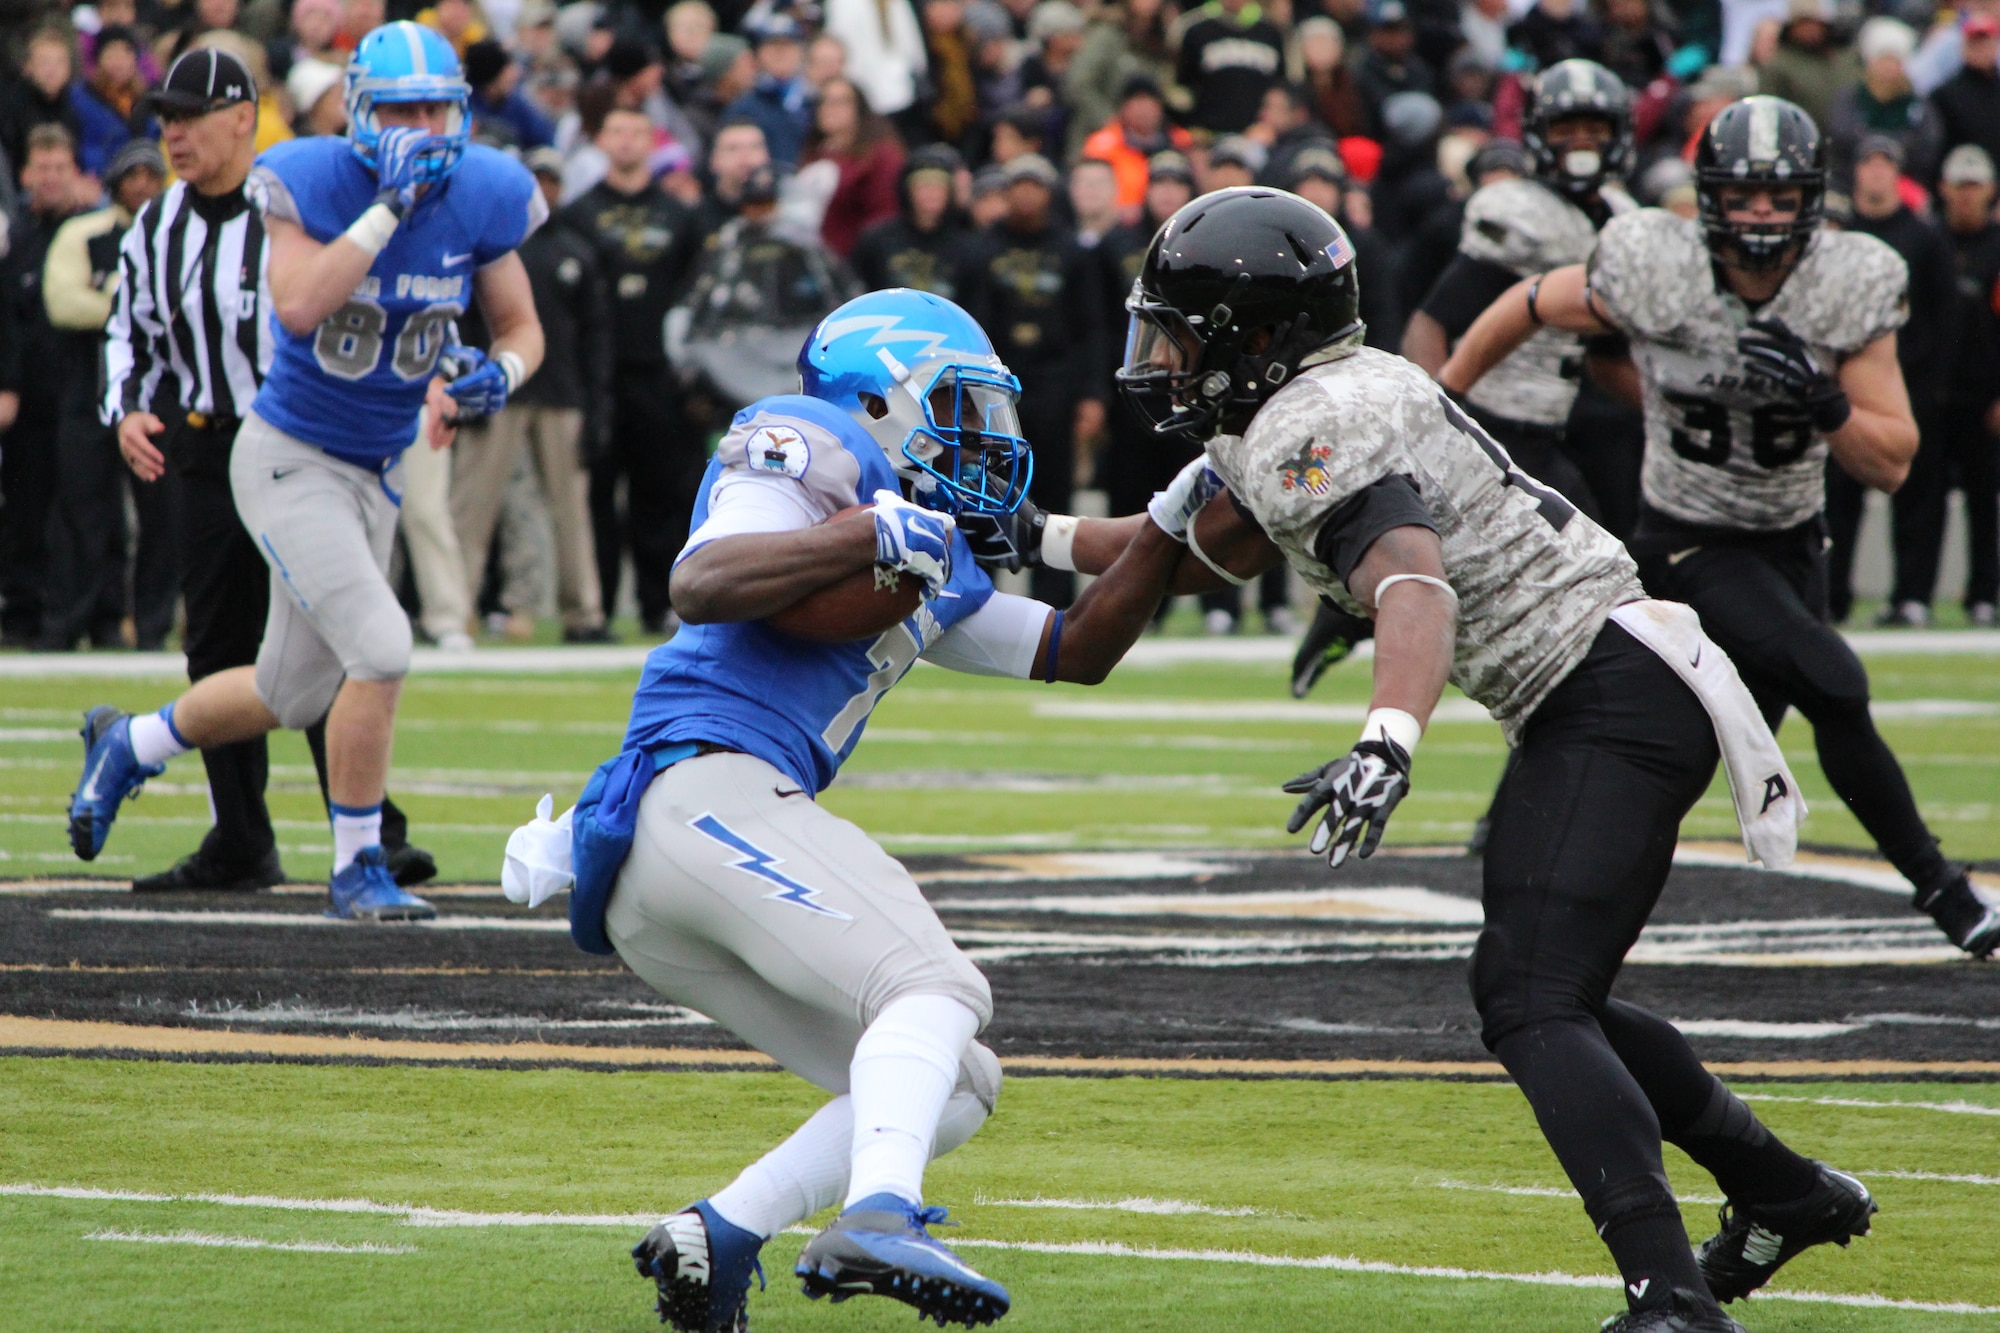 Air Force Falcon wide receiver Garrett Brown tries to elude Army's defense on the field Nov. 1, 2014, at the Falcons vs. Black Knights game at the U.S. Military Academy, N.Y. Air Force won, 23-6, securing the Commander-in-Chief's Trophy for the 19th time. Brown, an Academy junior, ran two catches for 54 yards and had four rushes for a total of nine yards. (U.S. Air Force photo/Cadet 3rd Class Alex Lee)